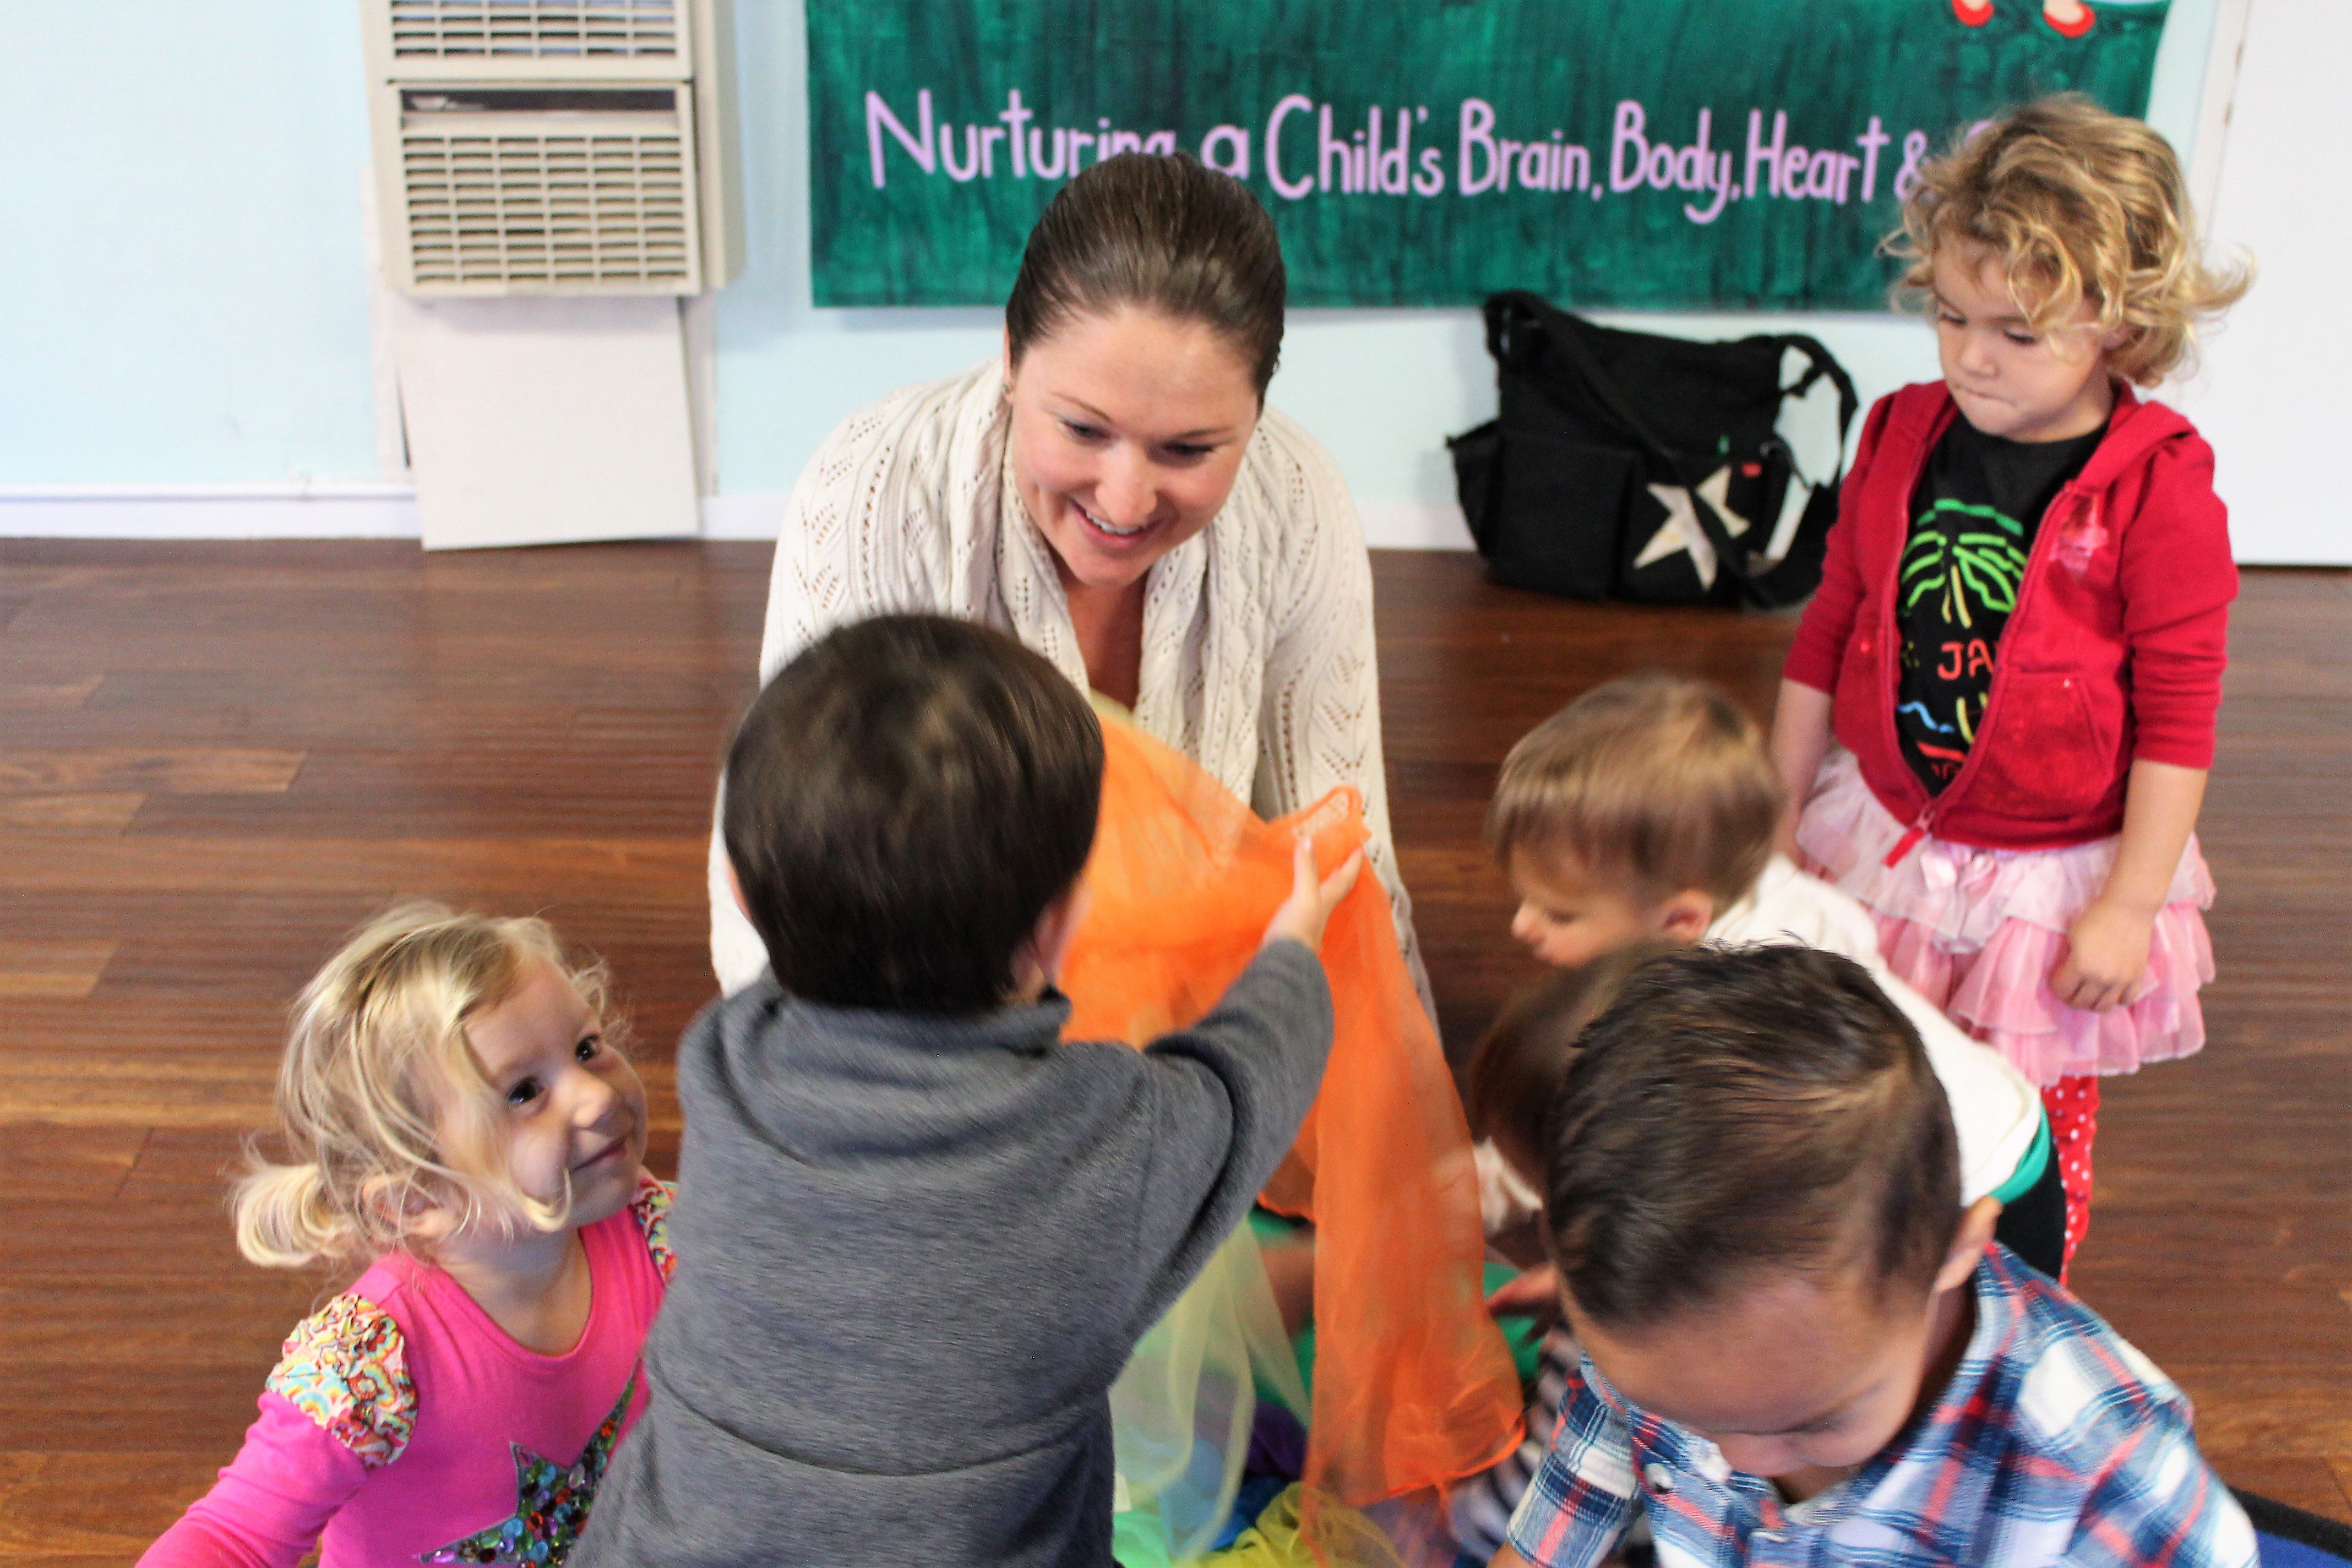 Kindermusik builds relationships between families and music